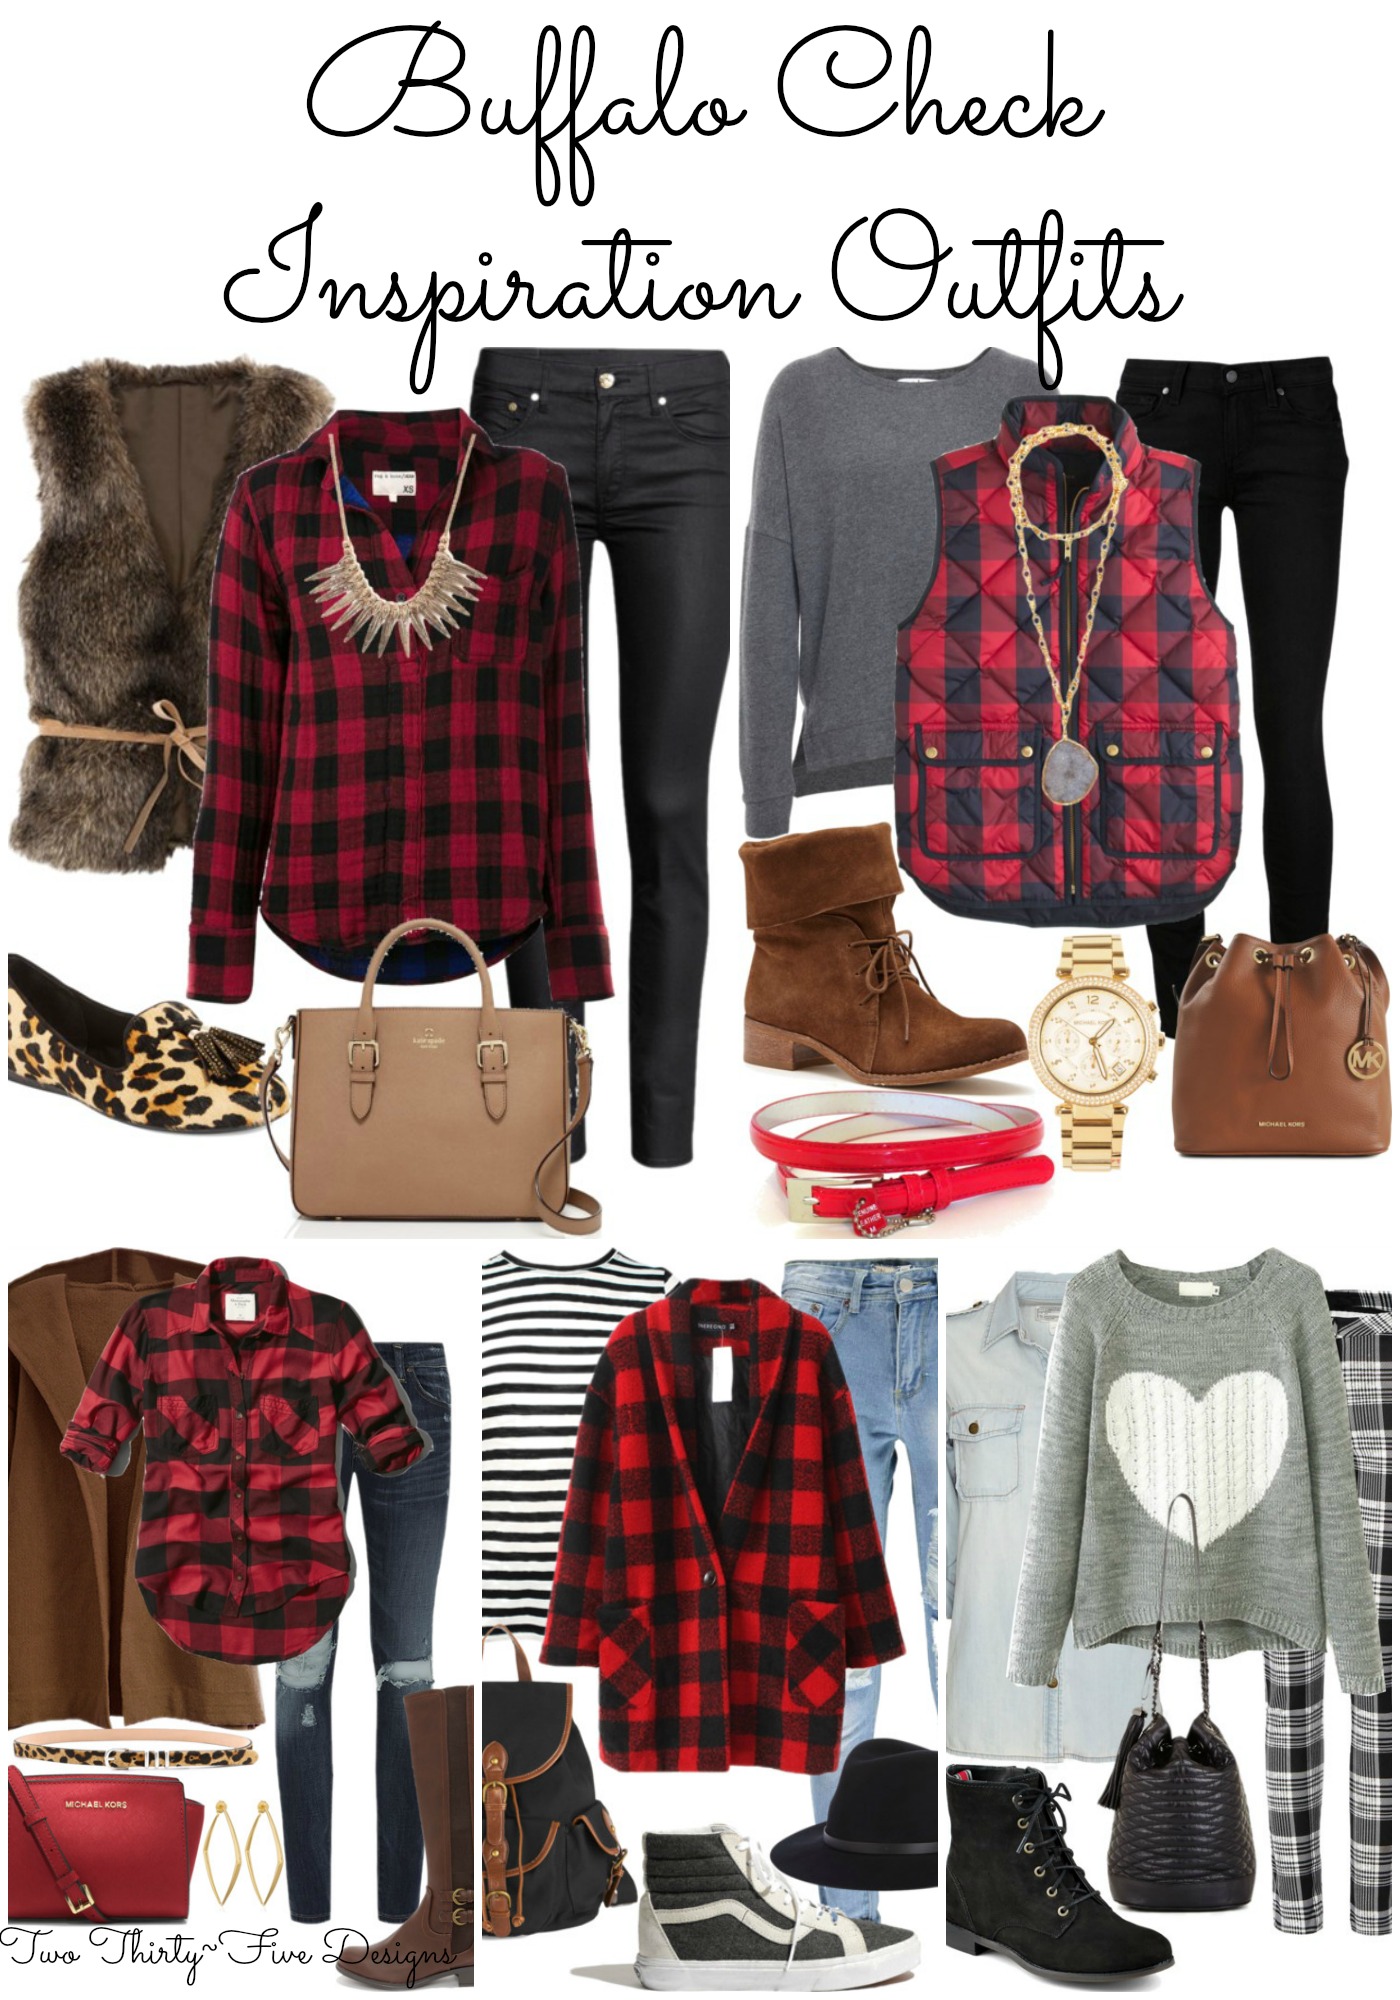 Plaid and Check Inspiration Outfits